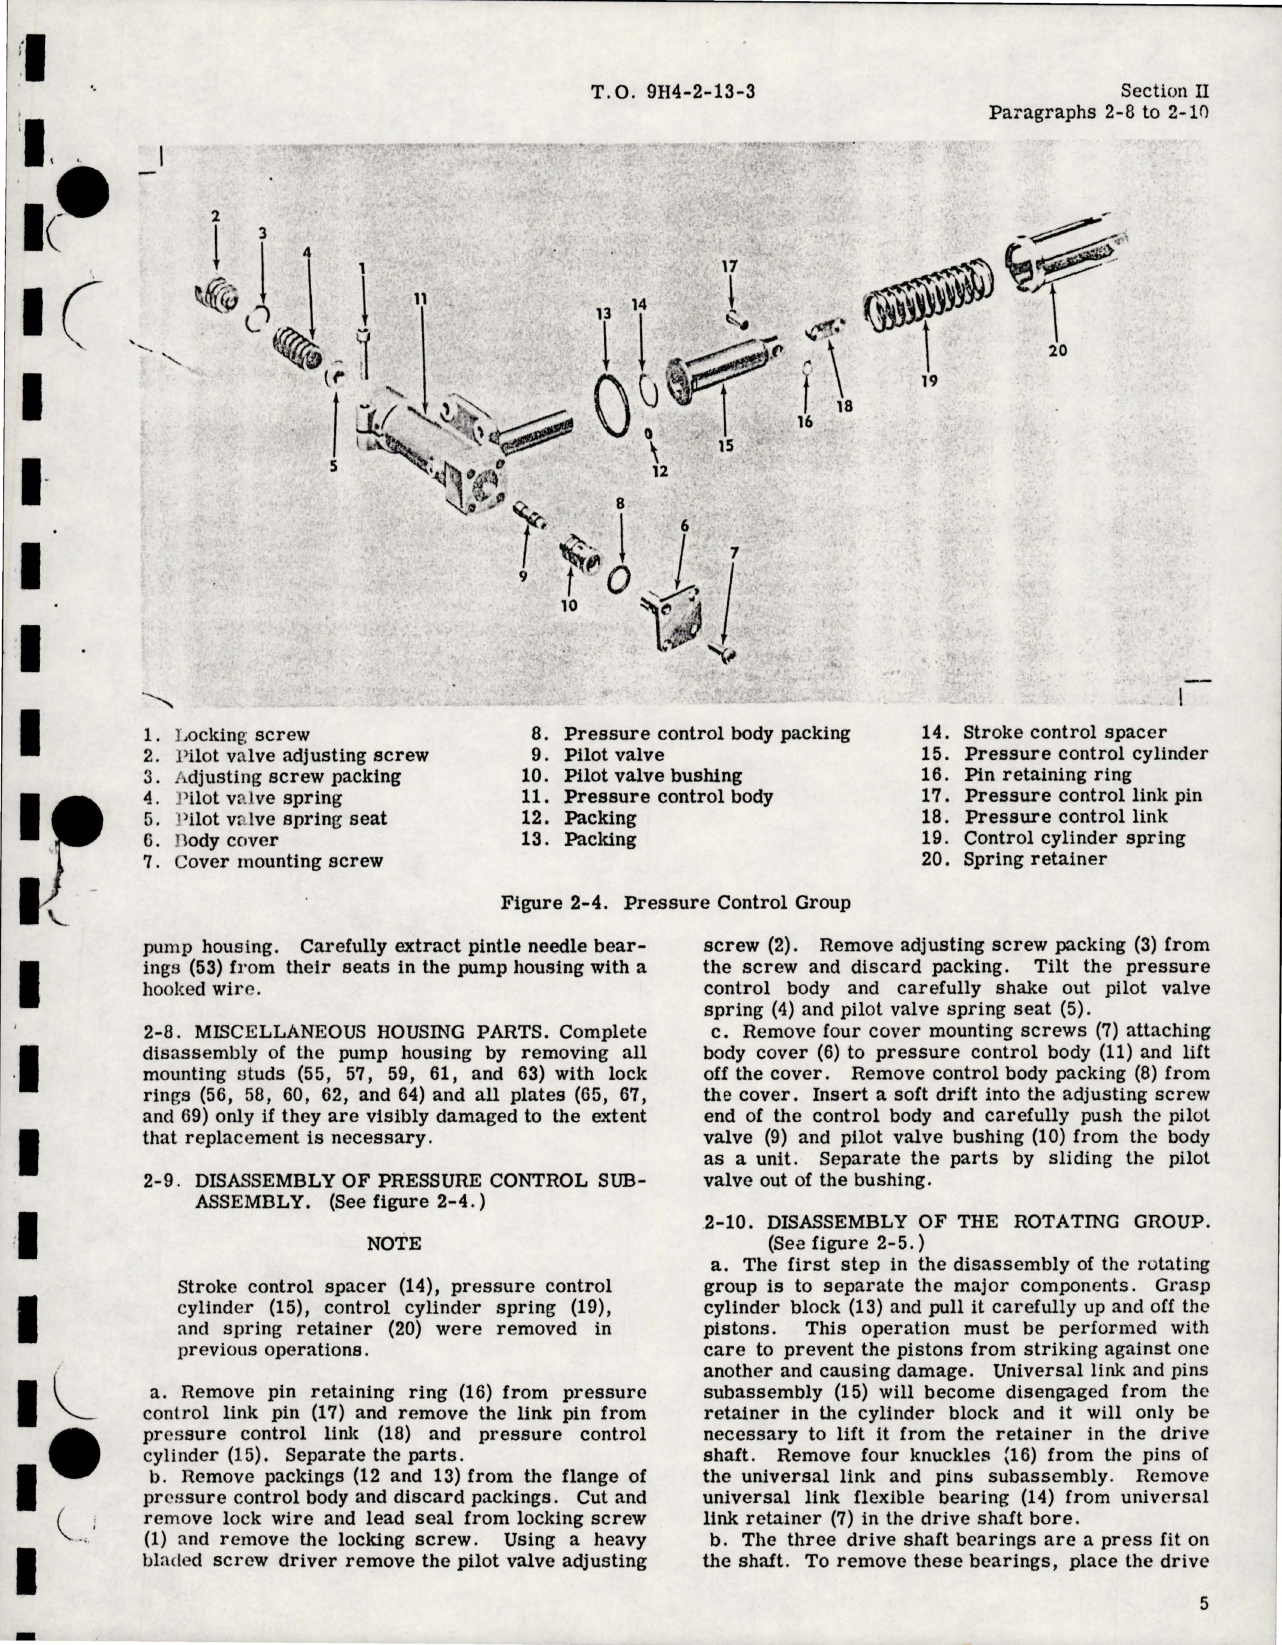 Sample page 9 from AirCorps Library document: Overhaul Instructions for Variable Delivery Hydraulic Pump - AA-32500-2 Series 